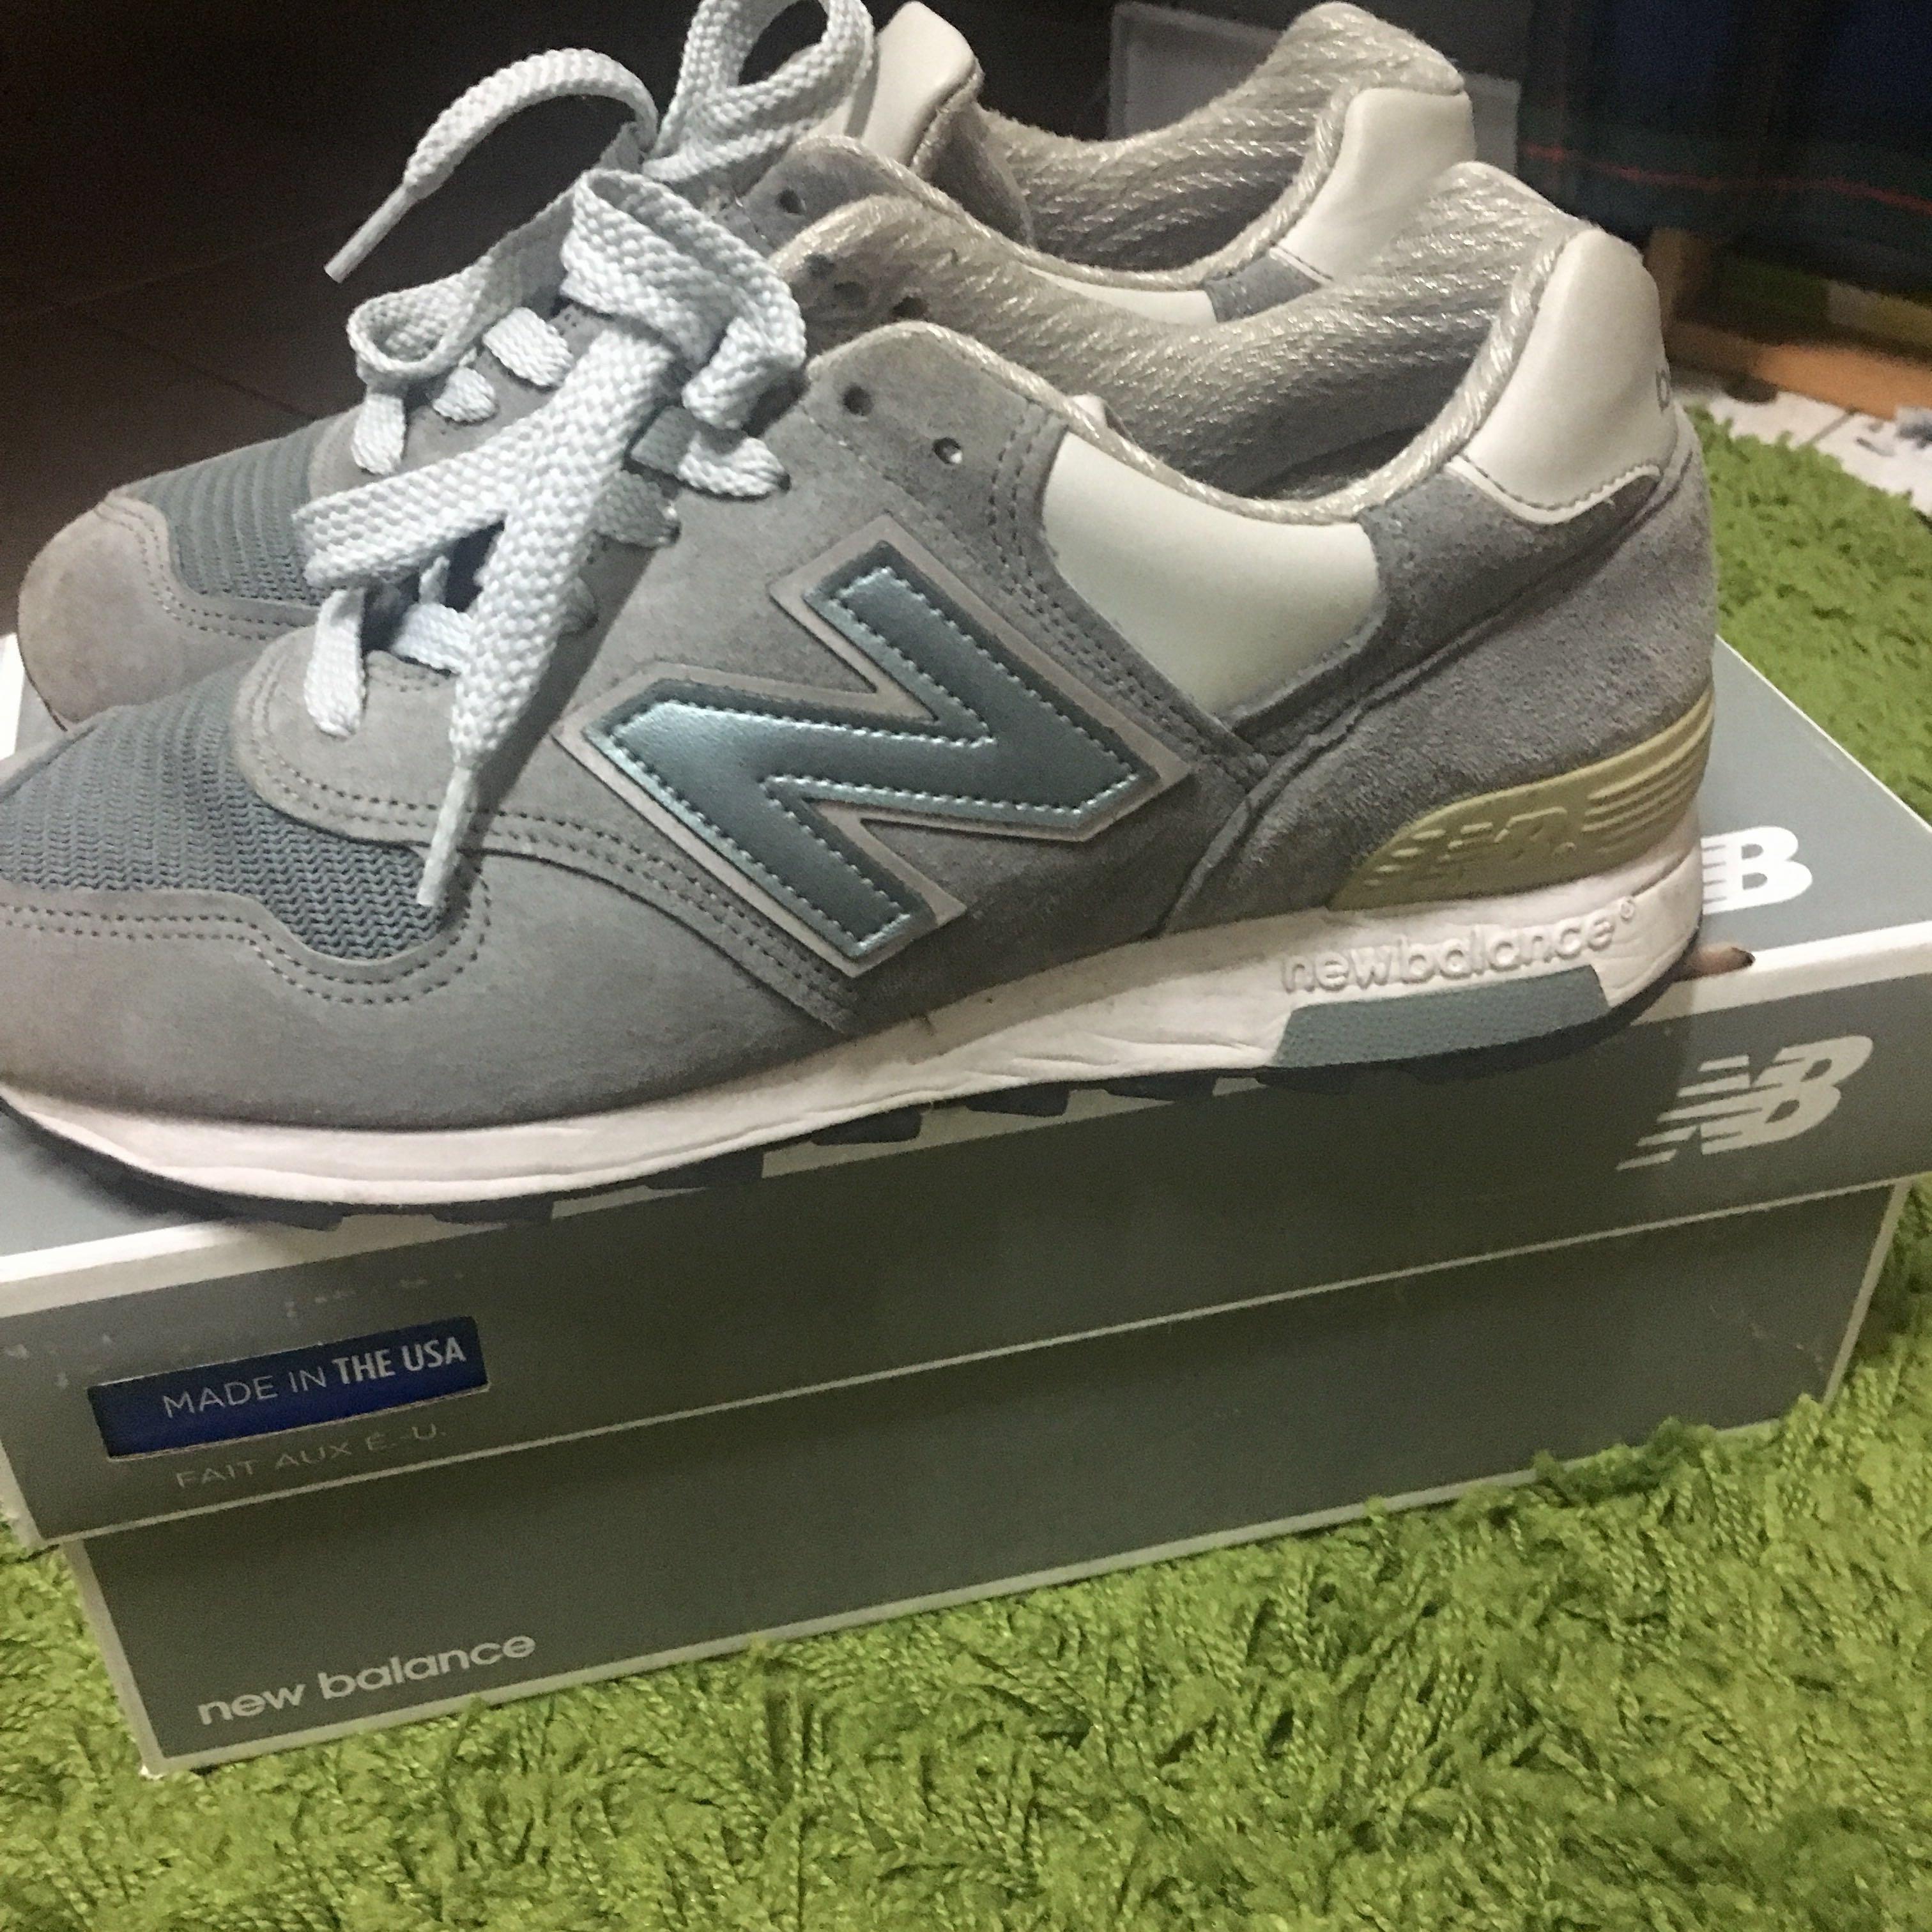 nb 1400 grey here has the latest